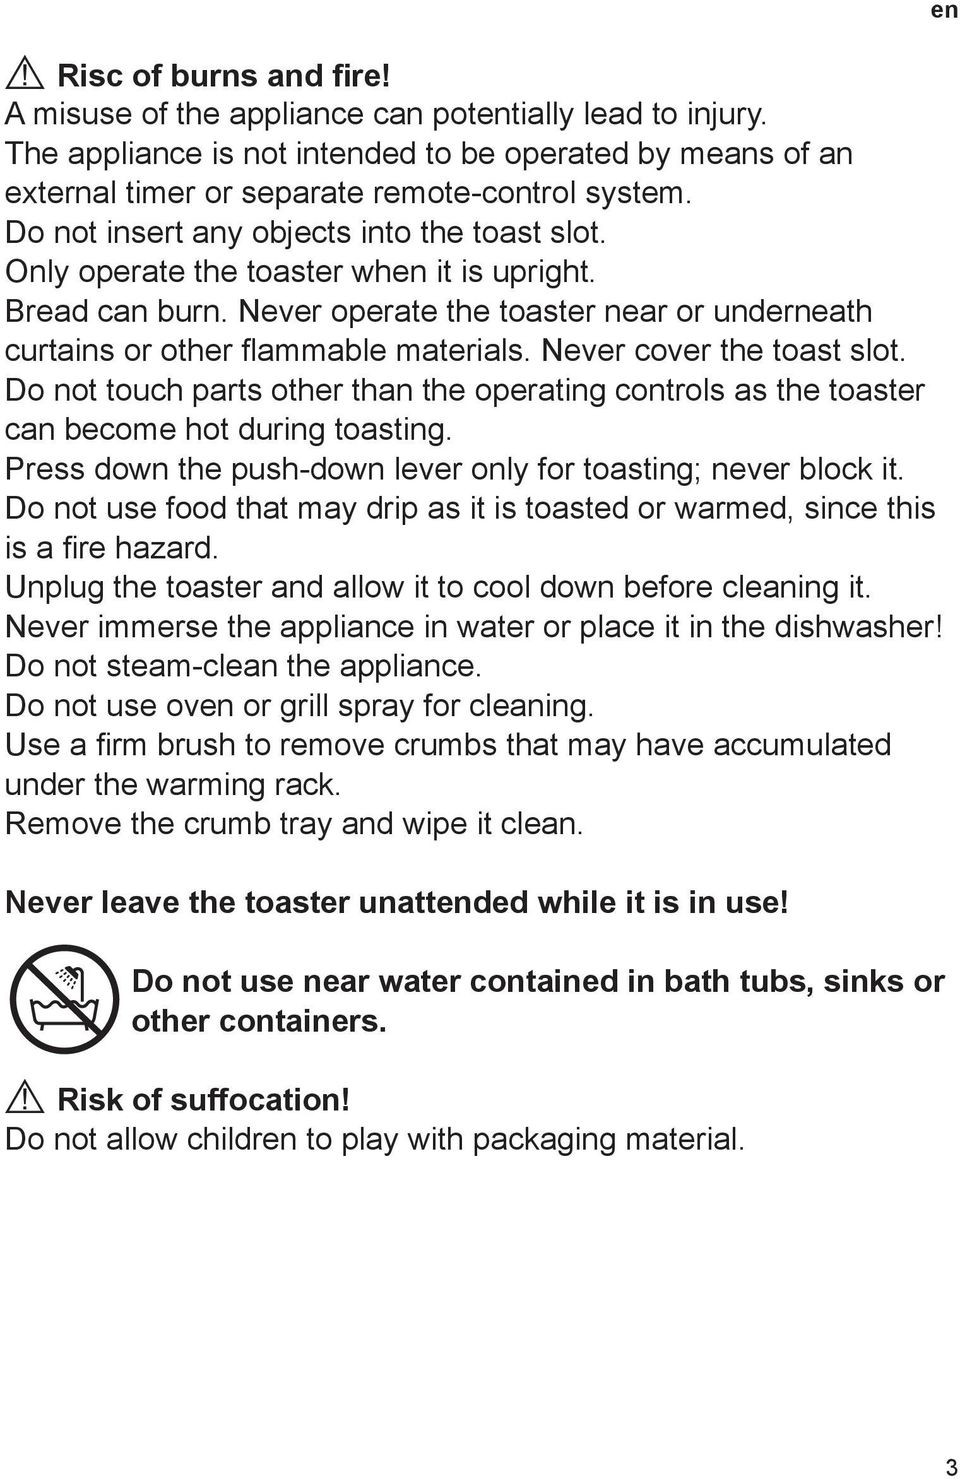 Never cover the toast slot. Do not touch parts other than the operating controls as the toaster can become hot during toasting. Press down the push-down lever only for toasting; never block it.